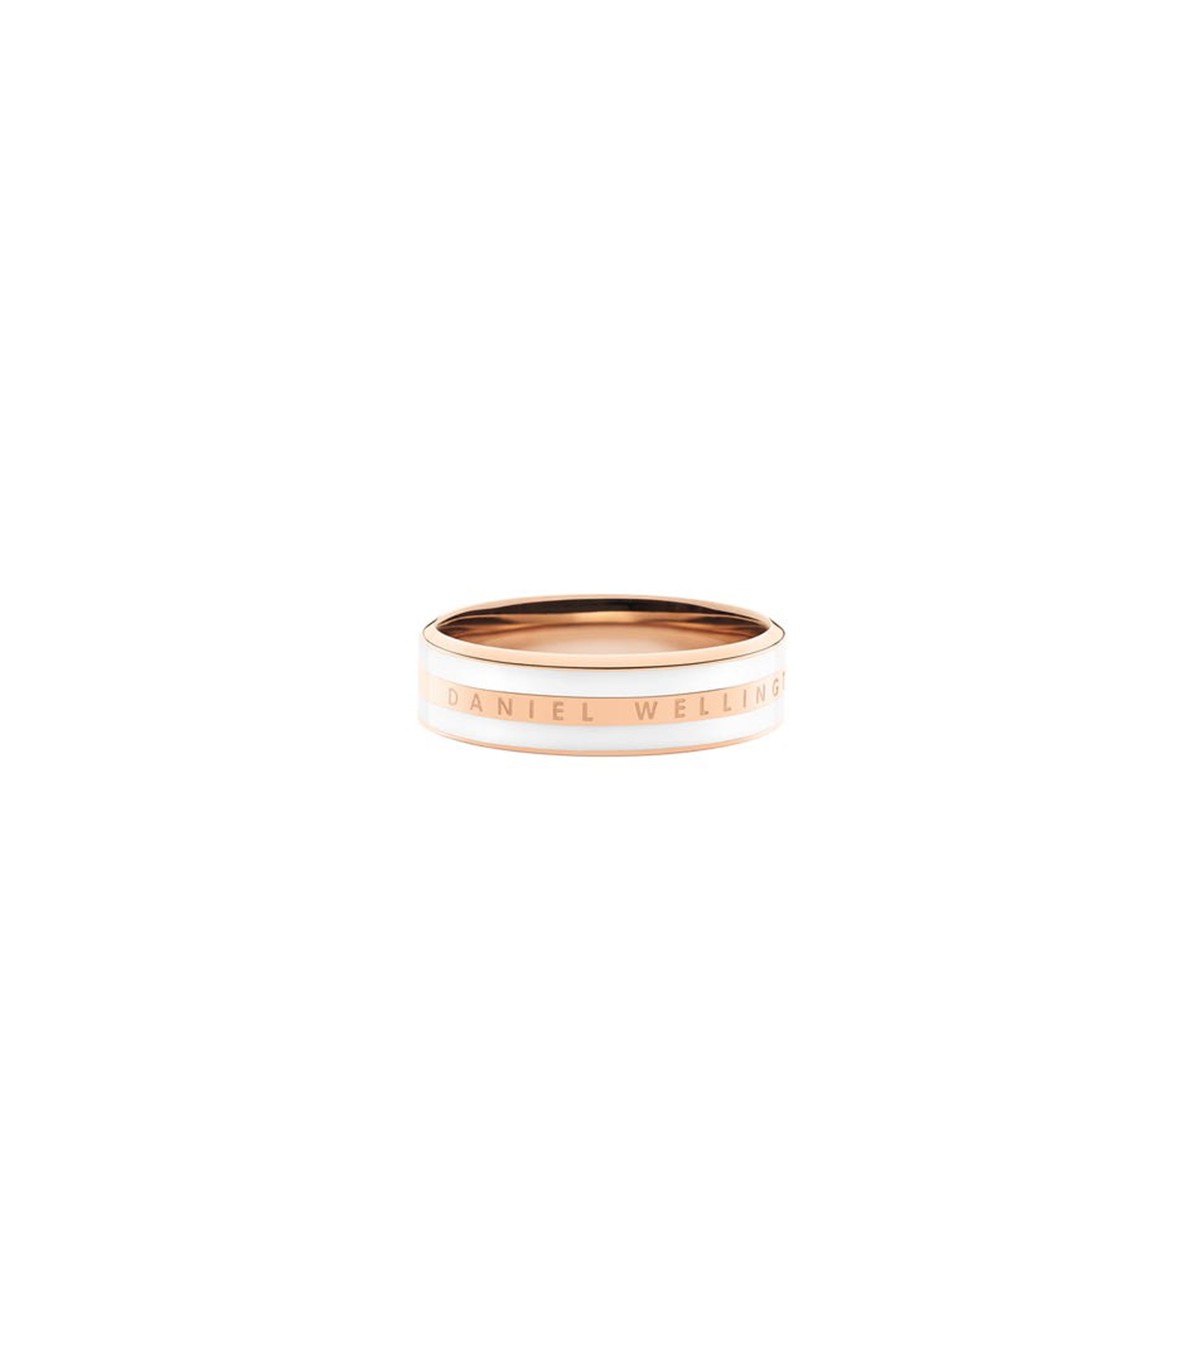 Daniel Wellington - Show off your favorite finger in the Elevation ring.  Discover our jewelry here: bit.ly/Shop_DW | Facebook